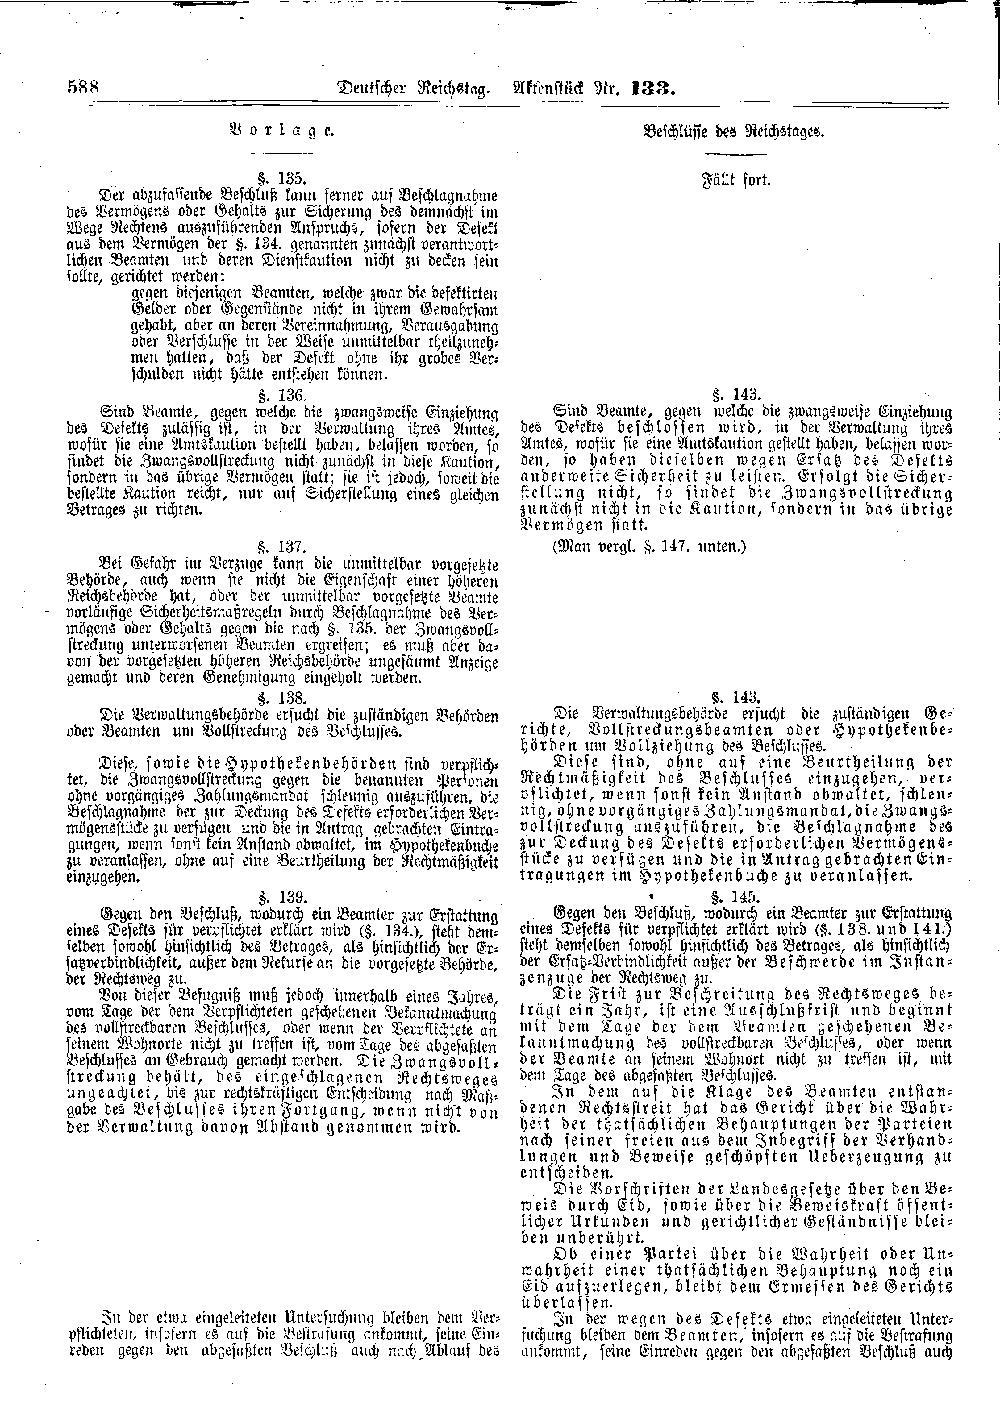 Scan of page 588